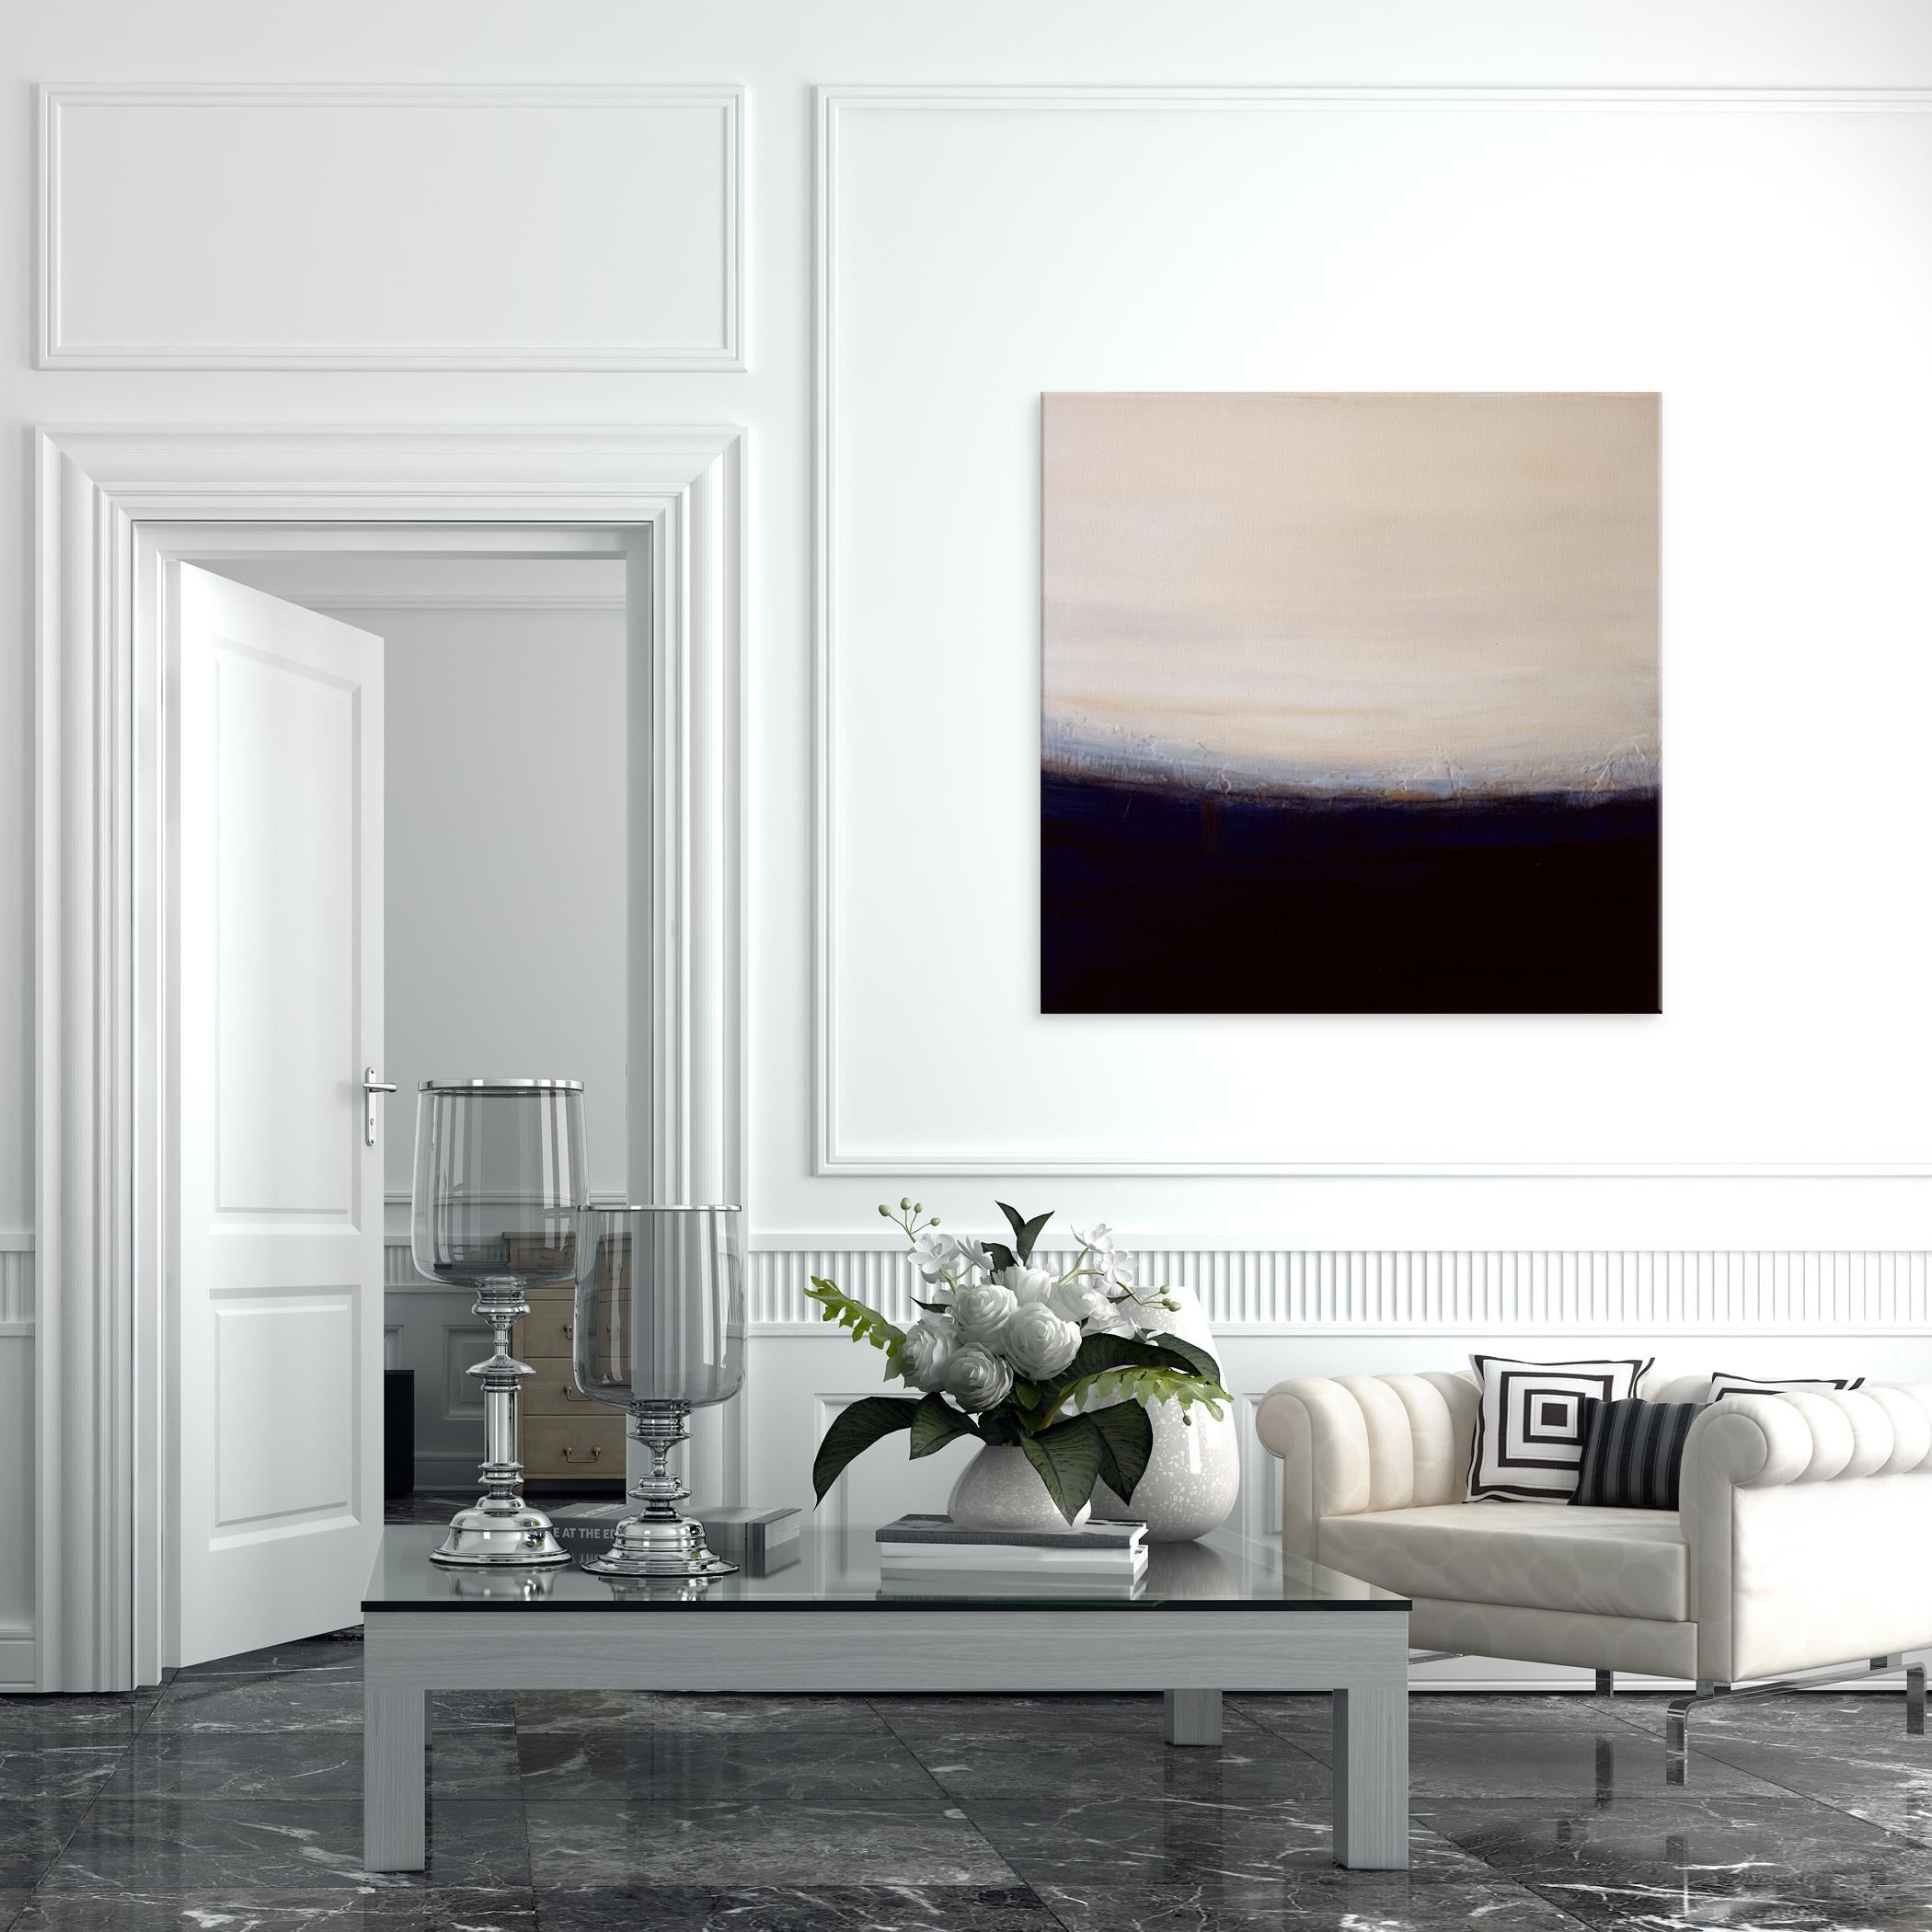 Enhance your space with this abstract expressionist painting, 'Nocturne' by Karen Moehr. An artist with a keen ability to create captivating works of art using minimal design elements. Known for bold brush strokes and soothing color palettes, her